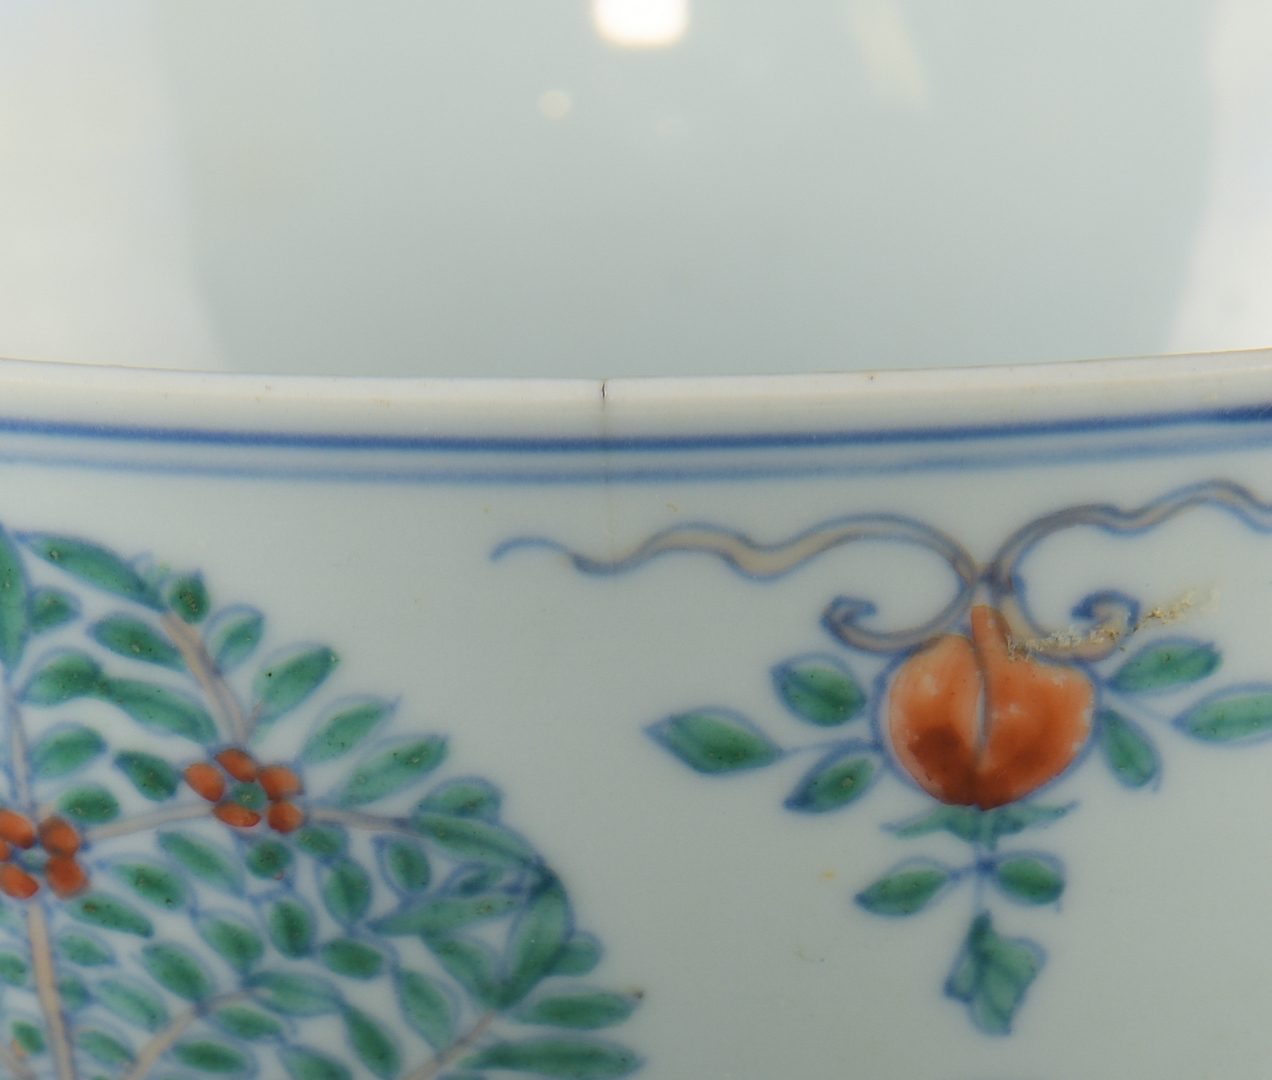 Lot 257: 3 Chinese Porcelain Items